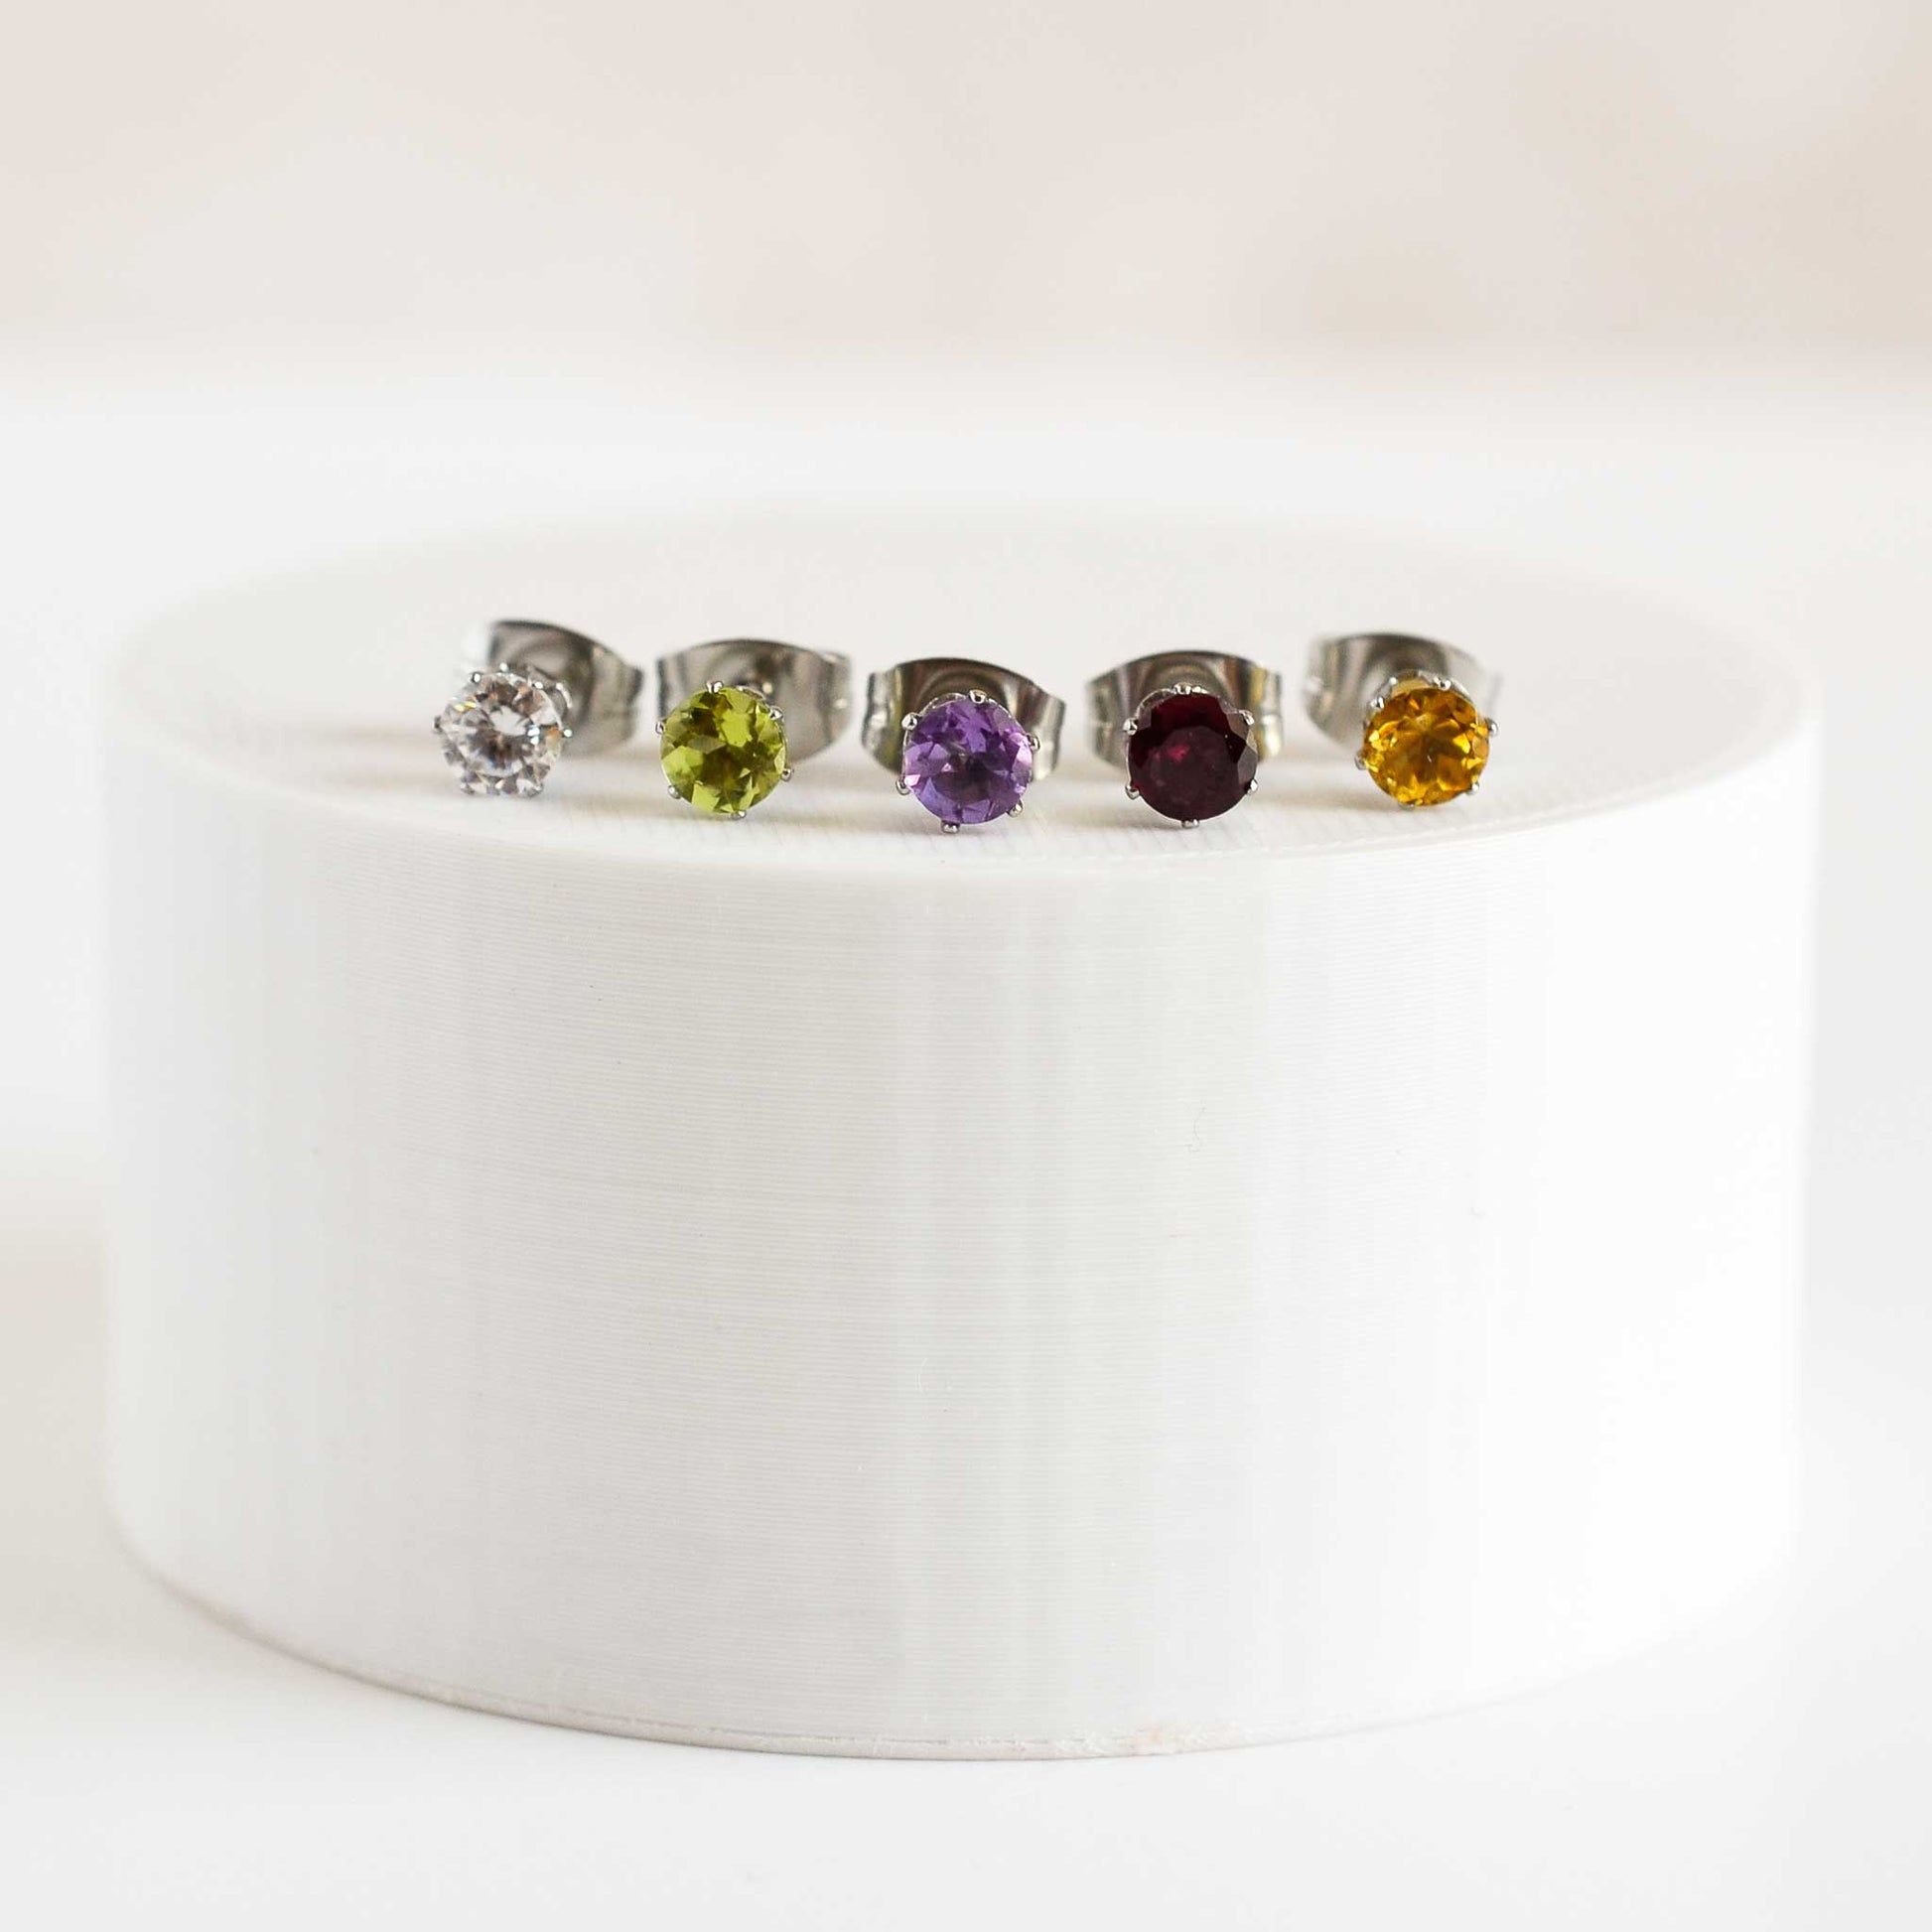 Five different coloured gemstone stud earrings sitting on a round white plinth